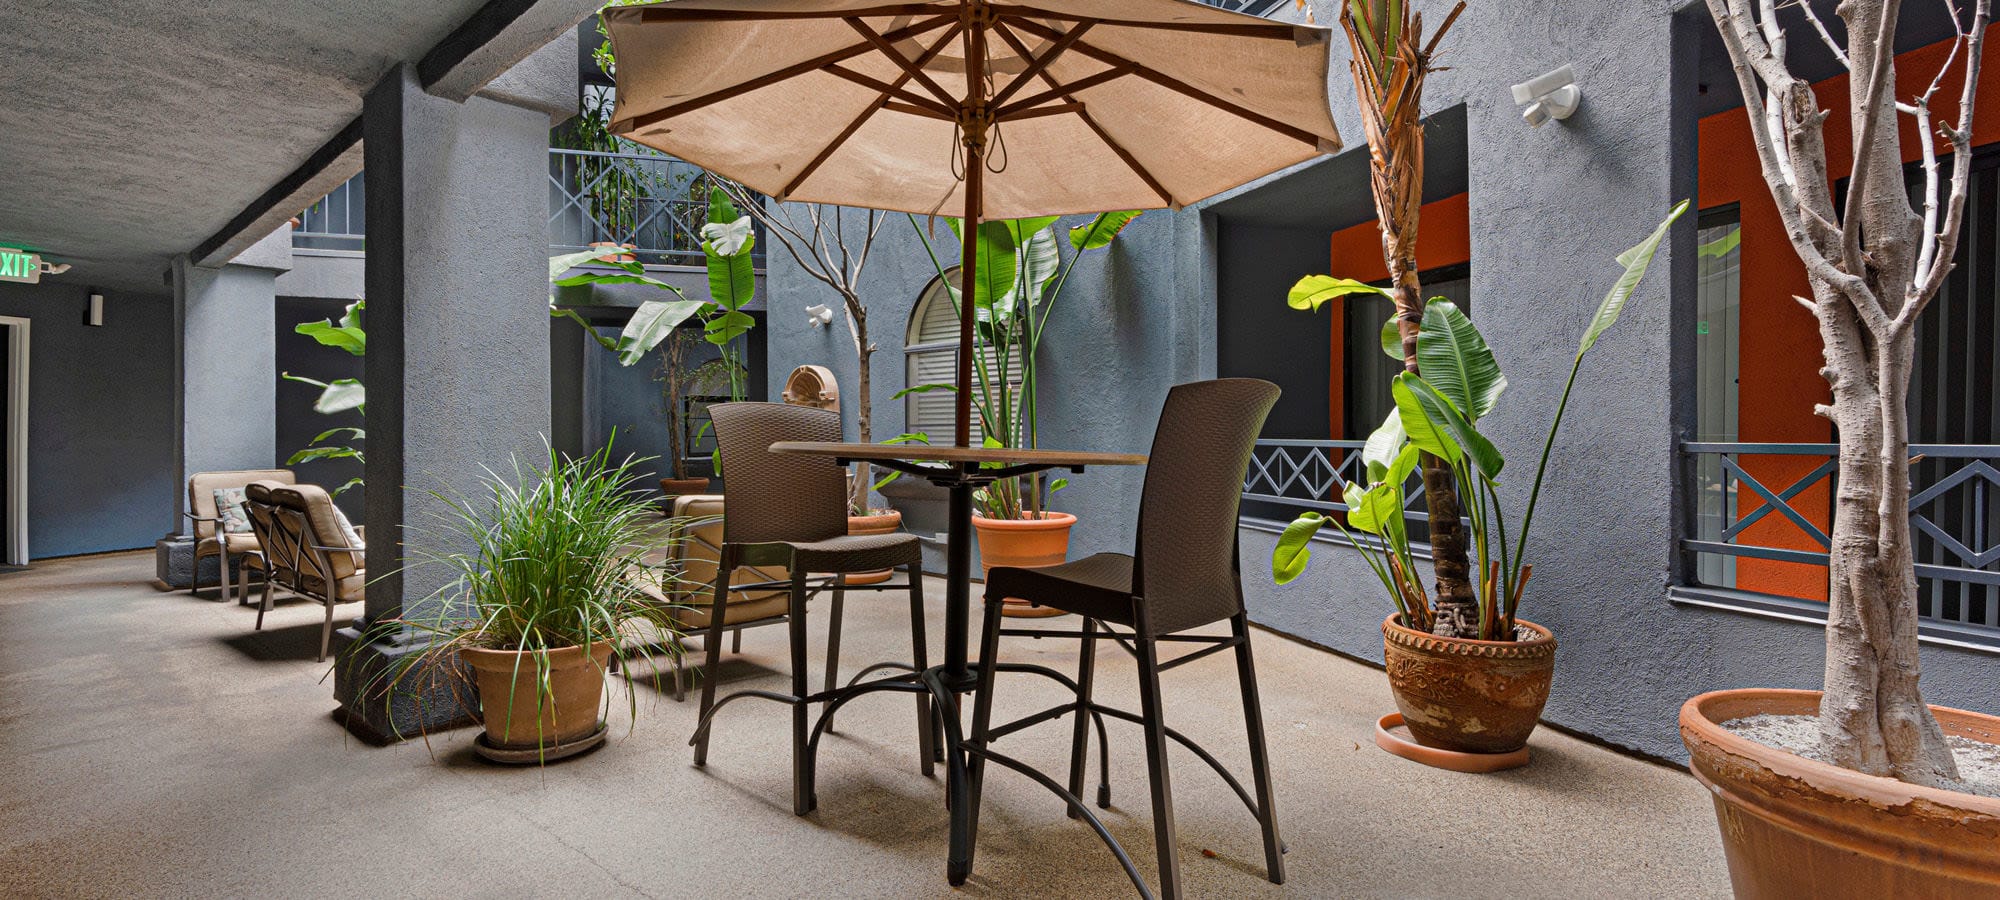 Exterior courtyard area with lots of seating and sun coverings at The Jeremy in Los Angeles, California